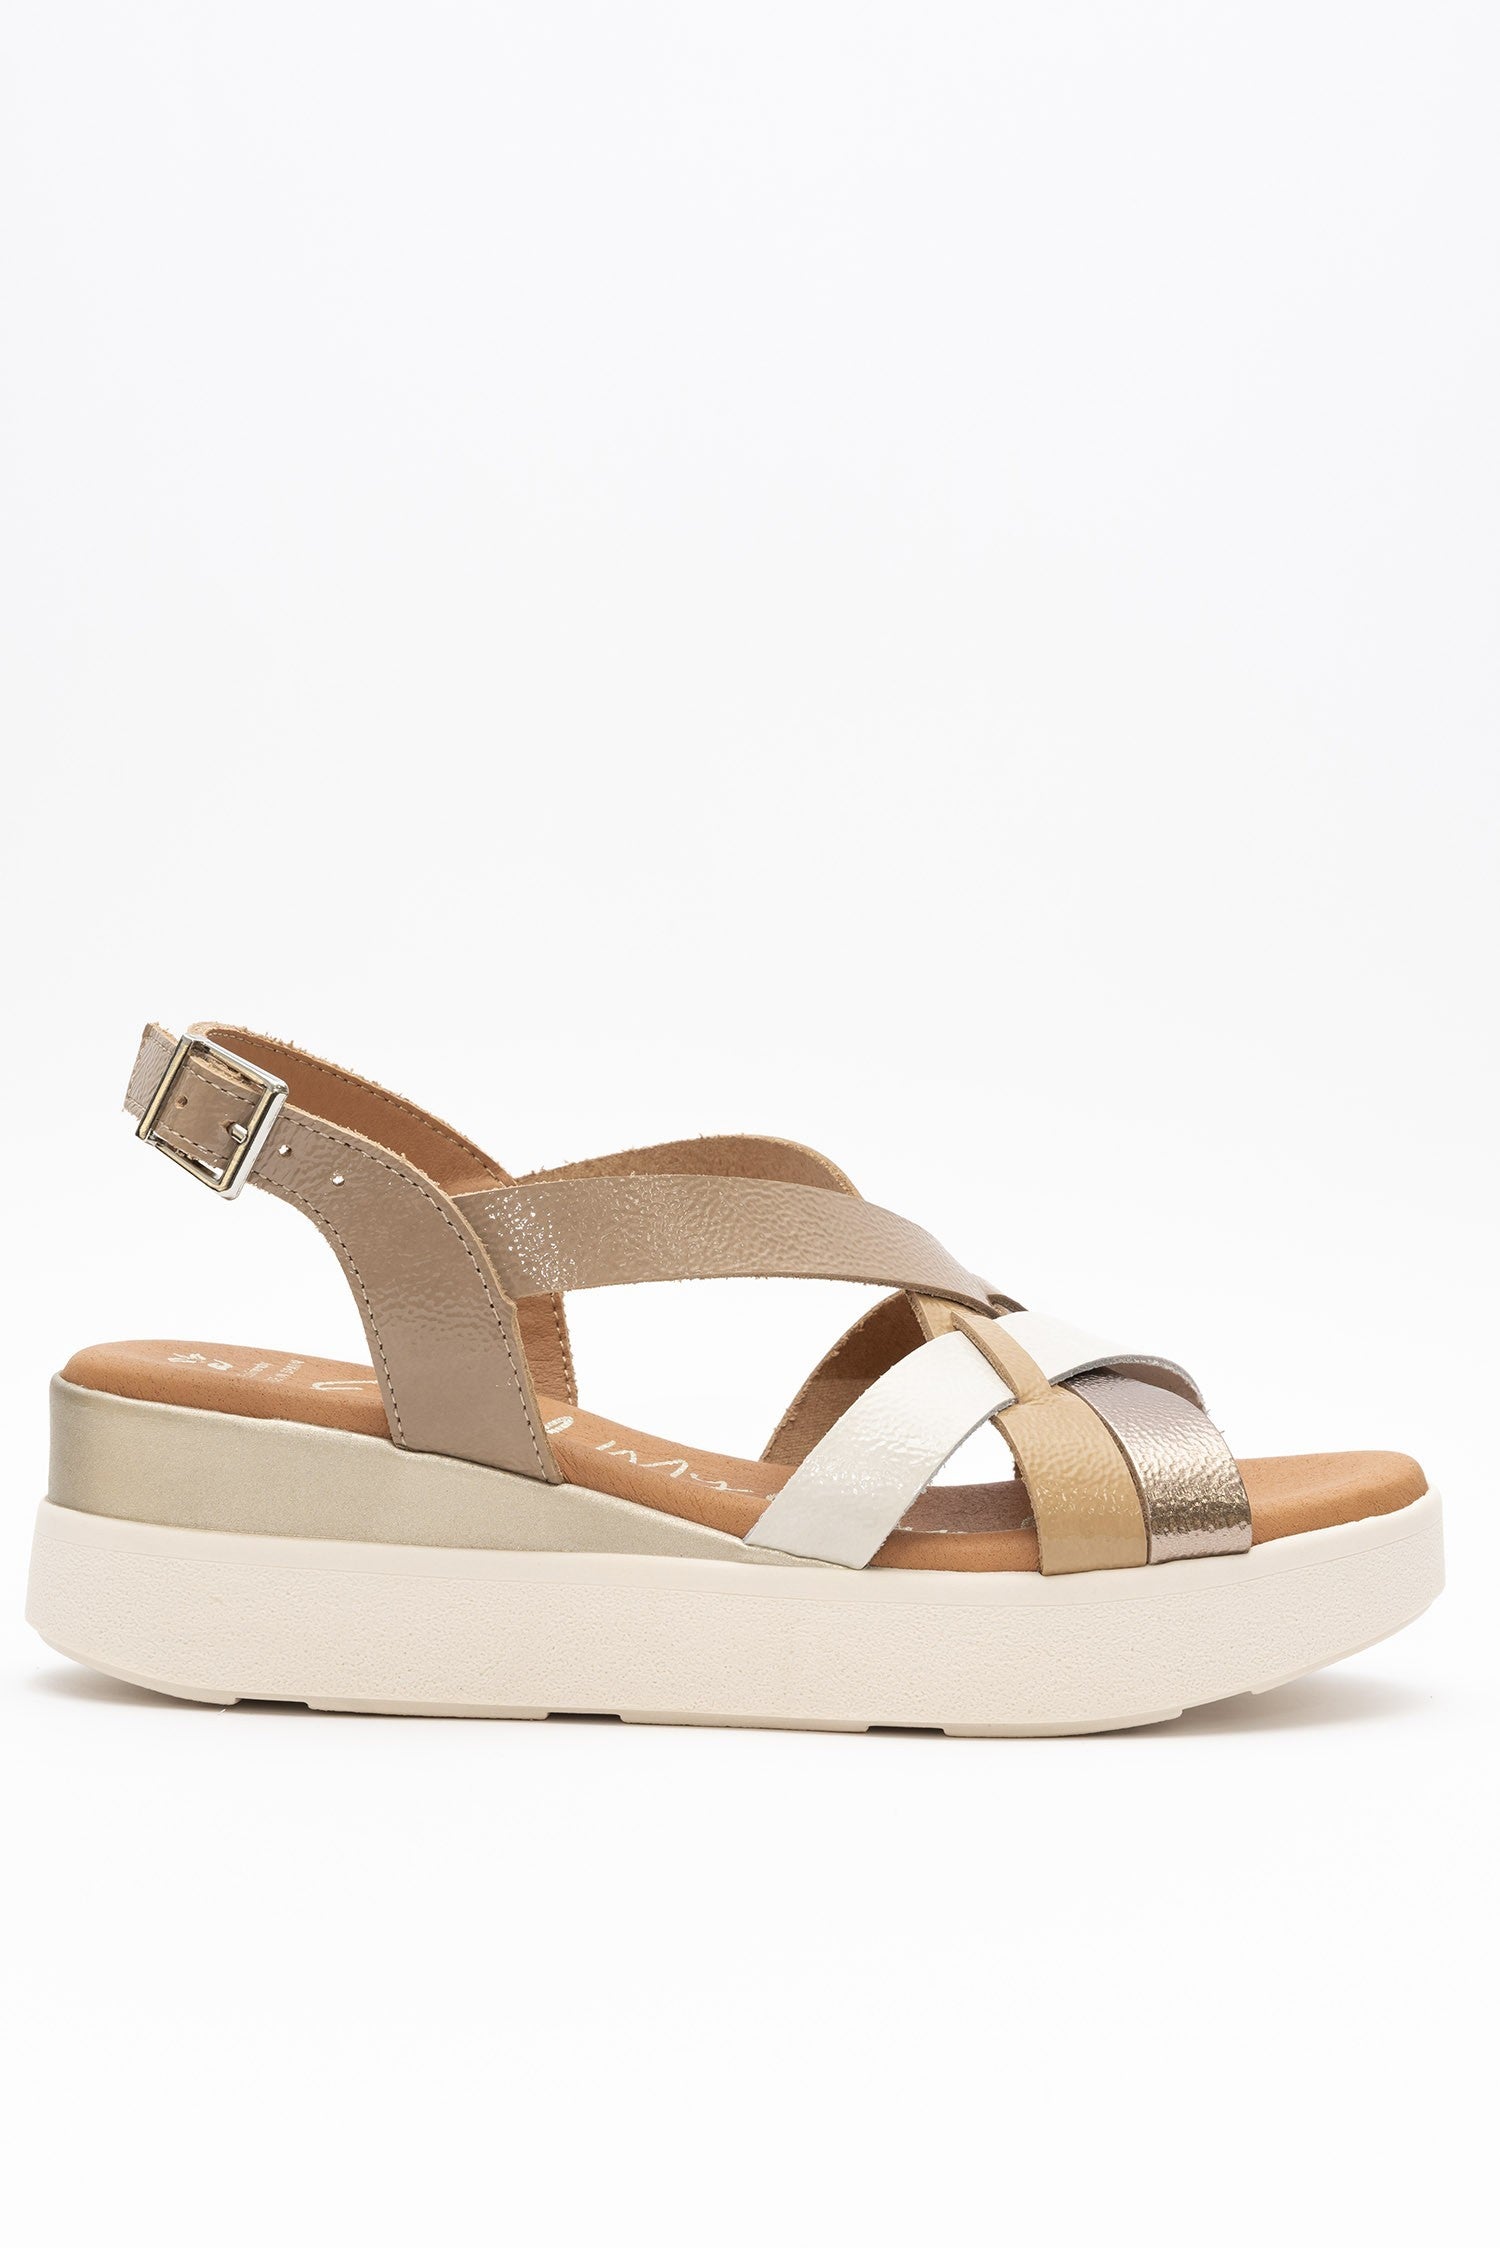 OH MY SANDALS 5418 TAUPE